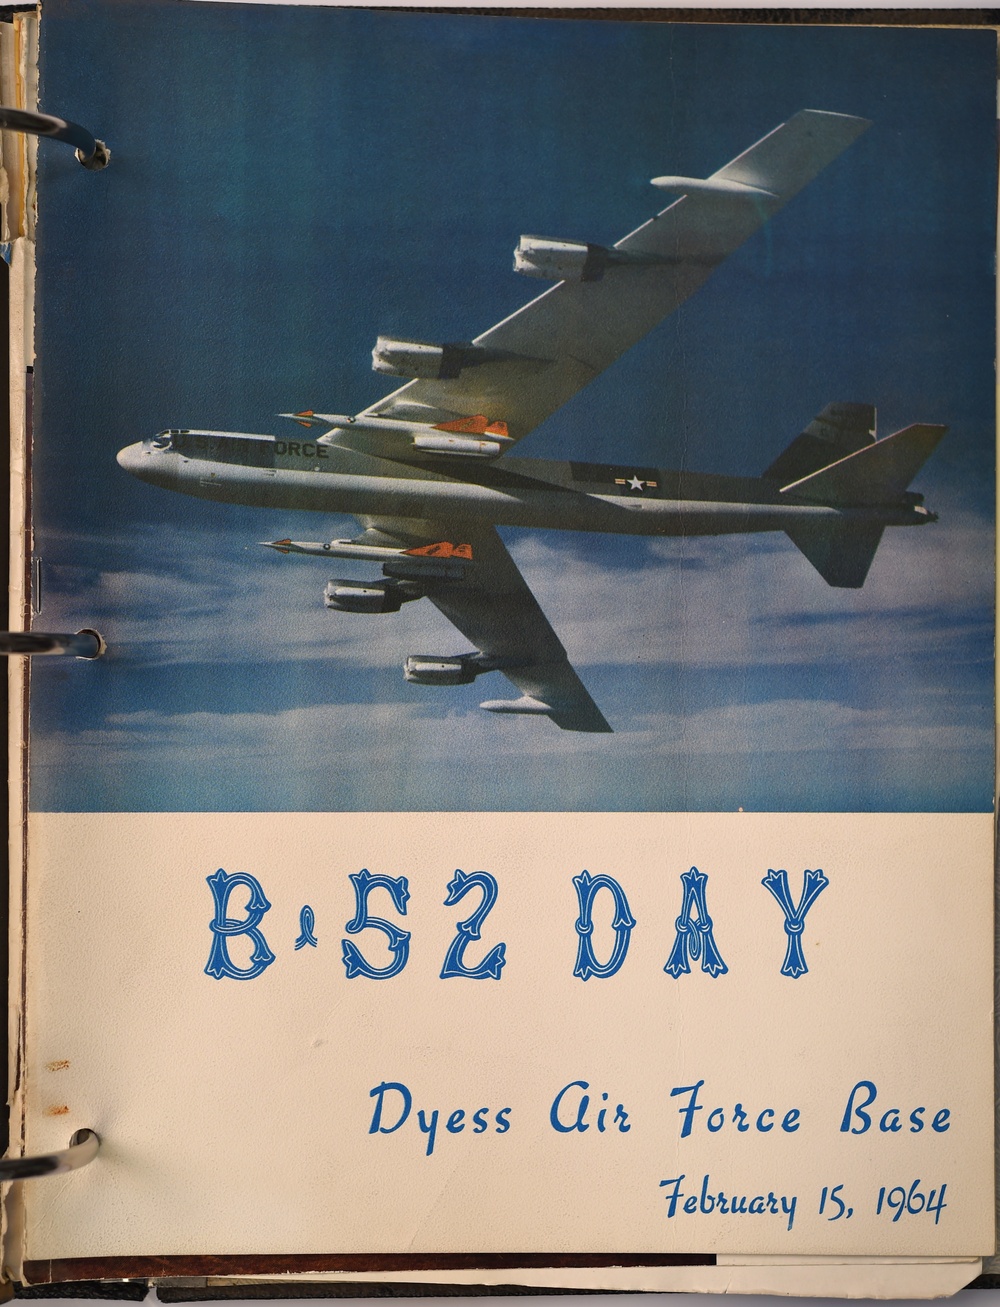 Dyess Air Force Base in the 1960s